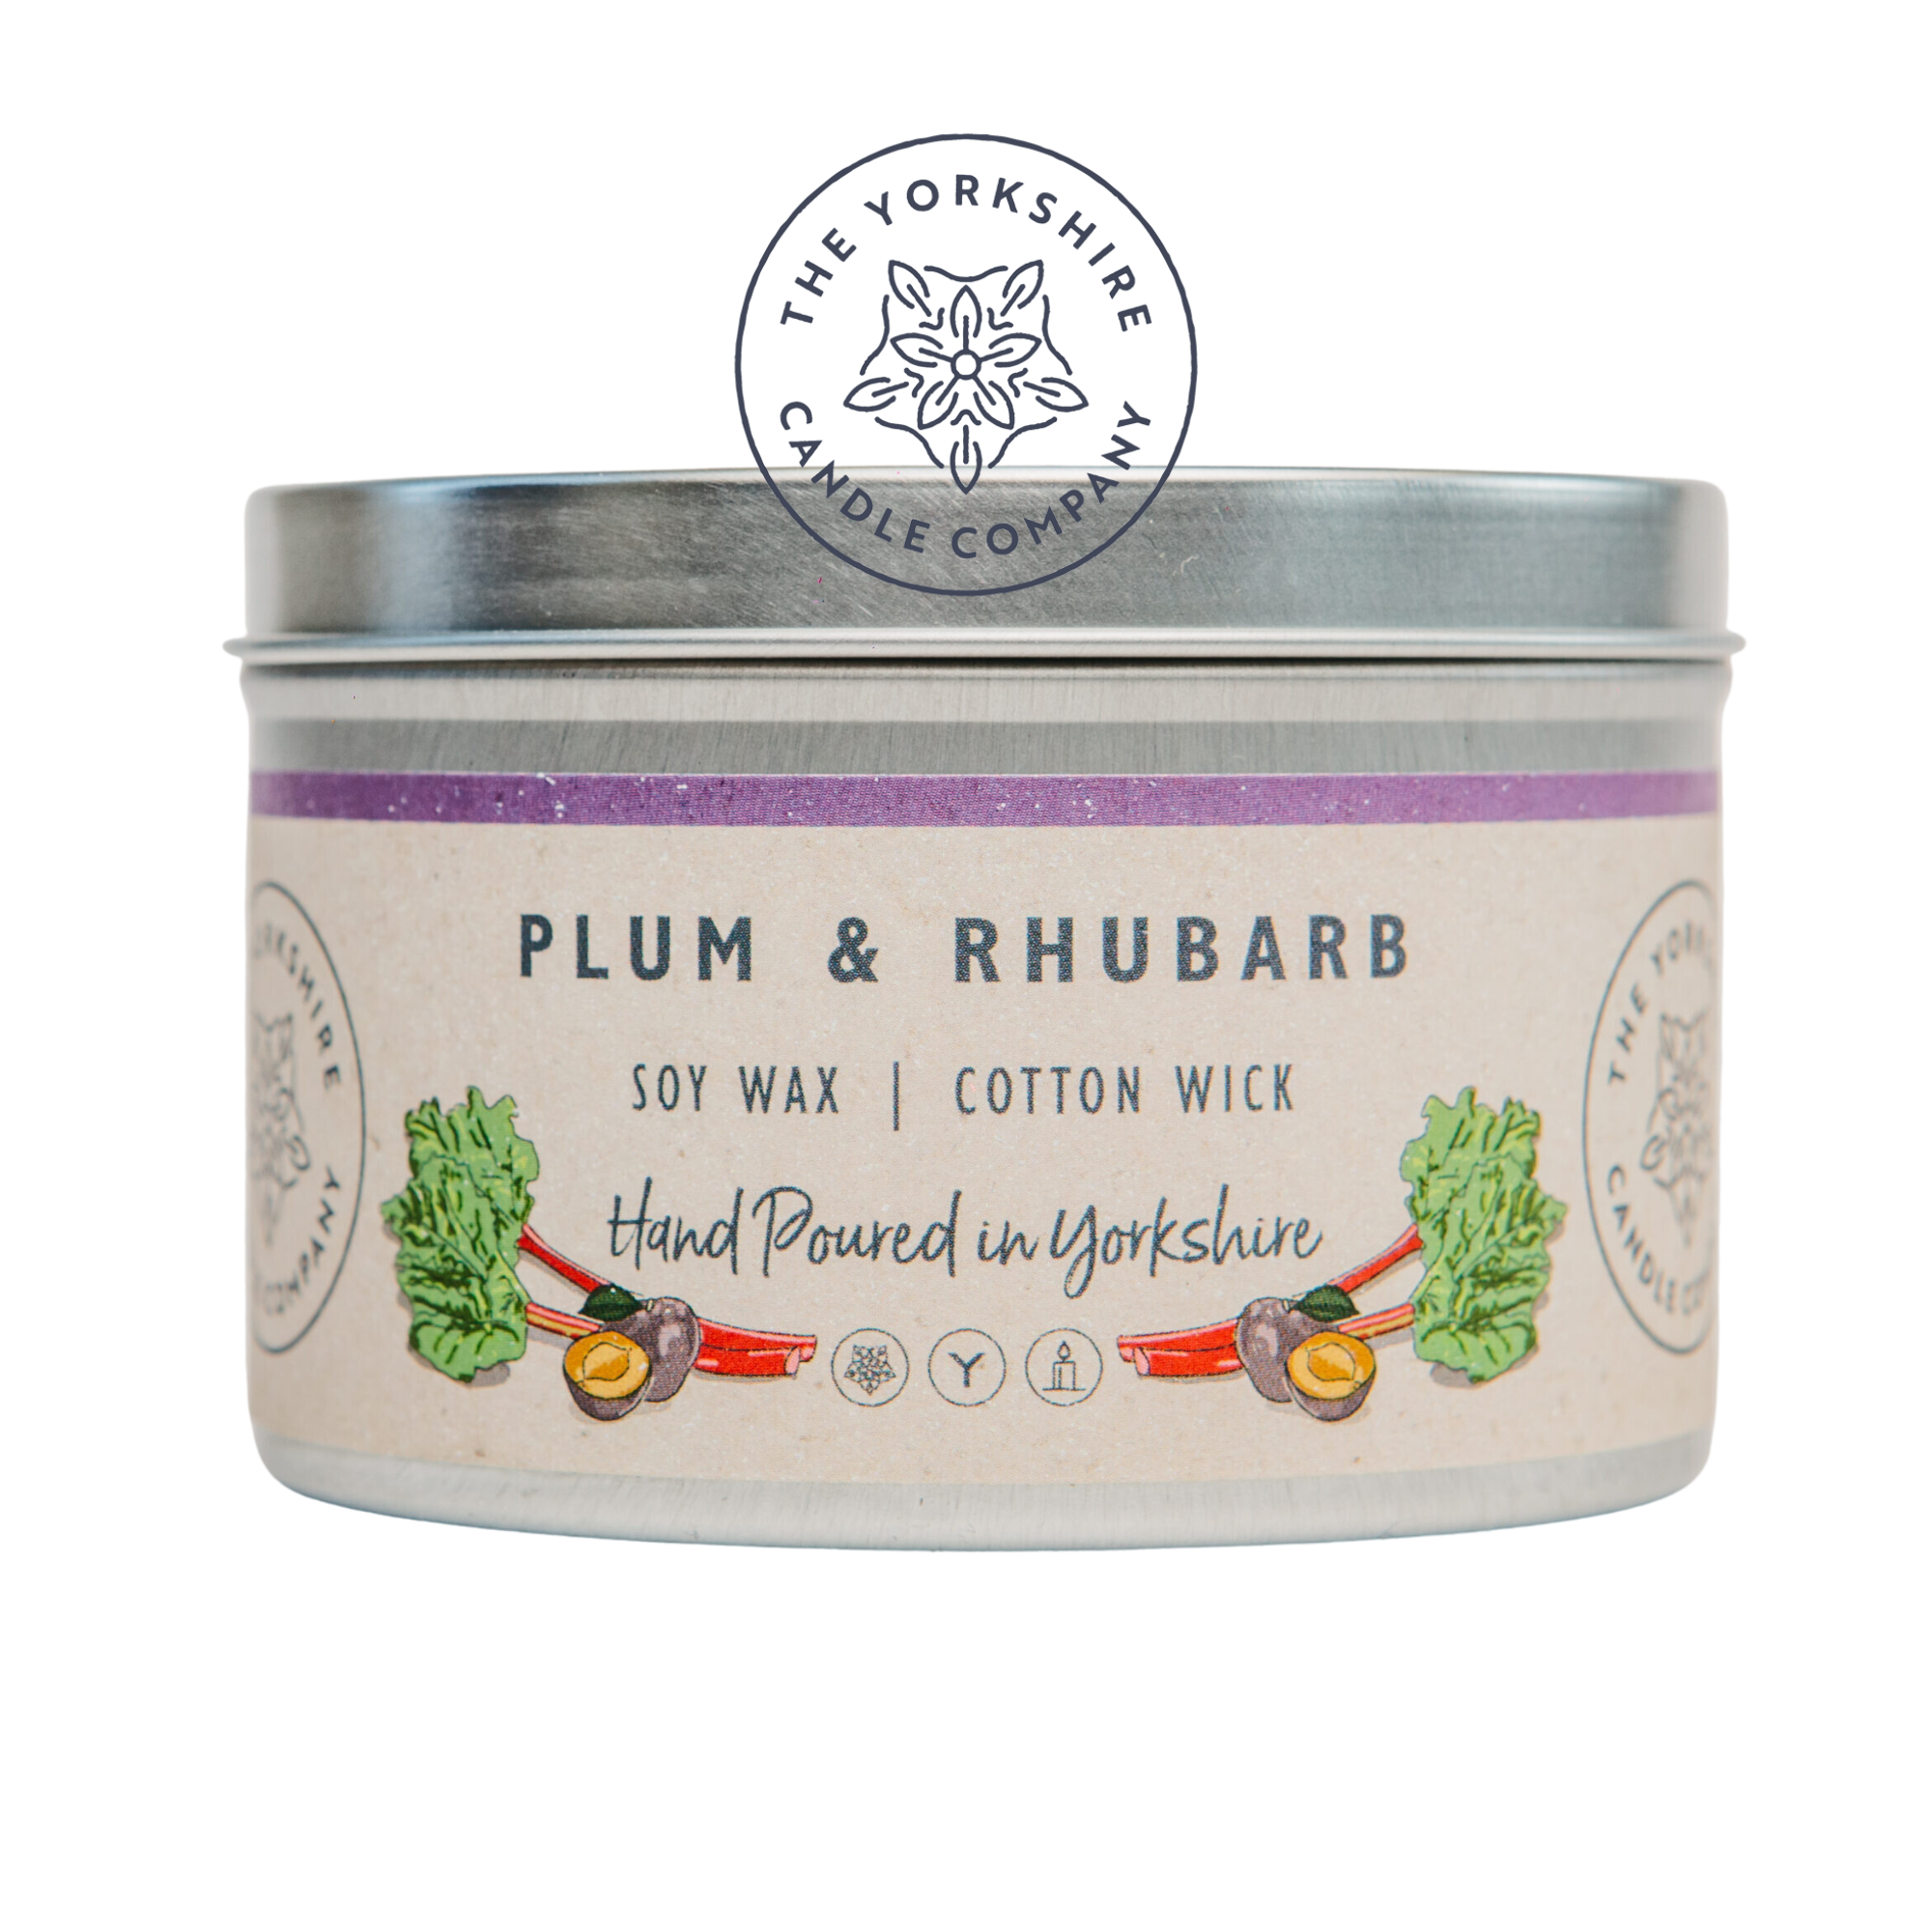 Plum & Rhubarb - Soy Wax Cotton Wick Hand Poured Candle by The Yorkshire Candle Company